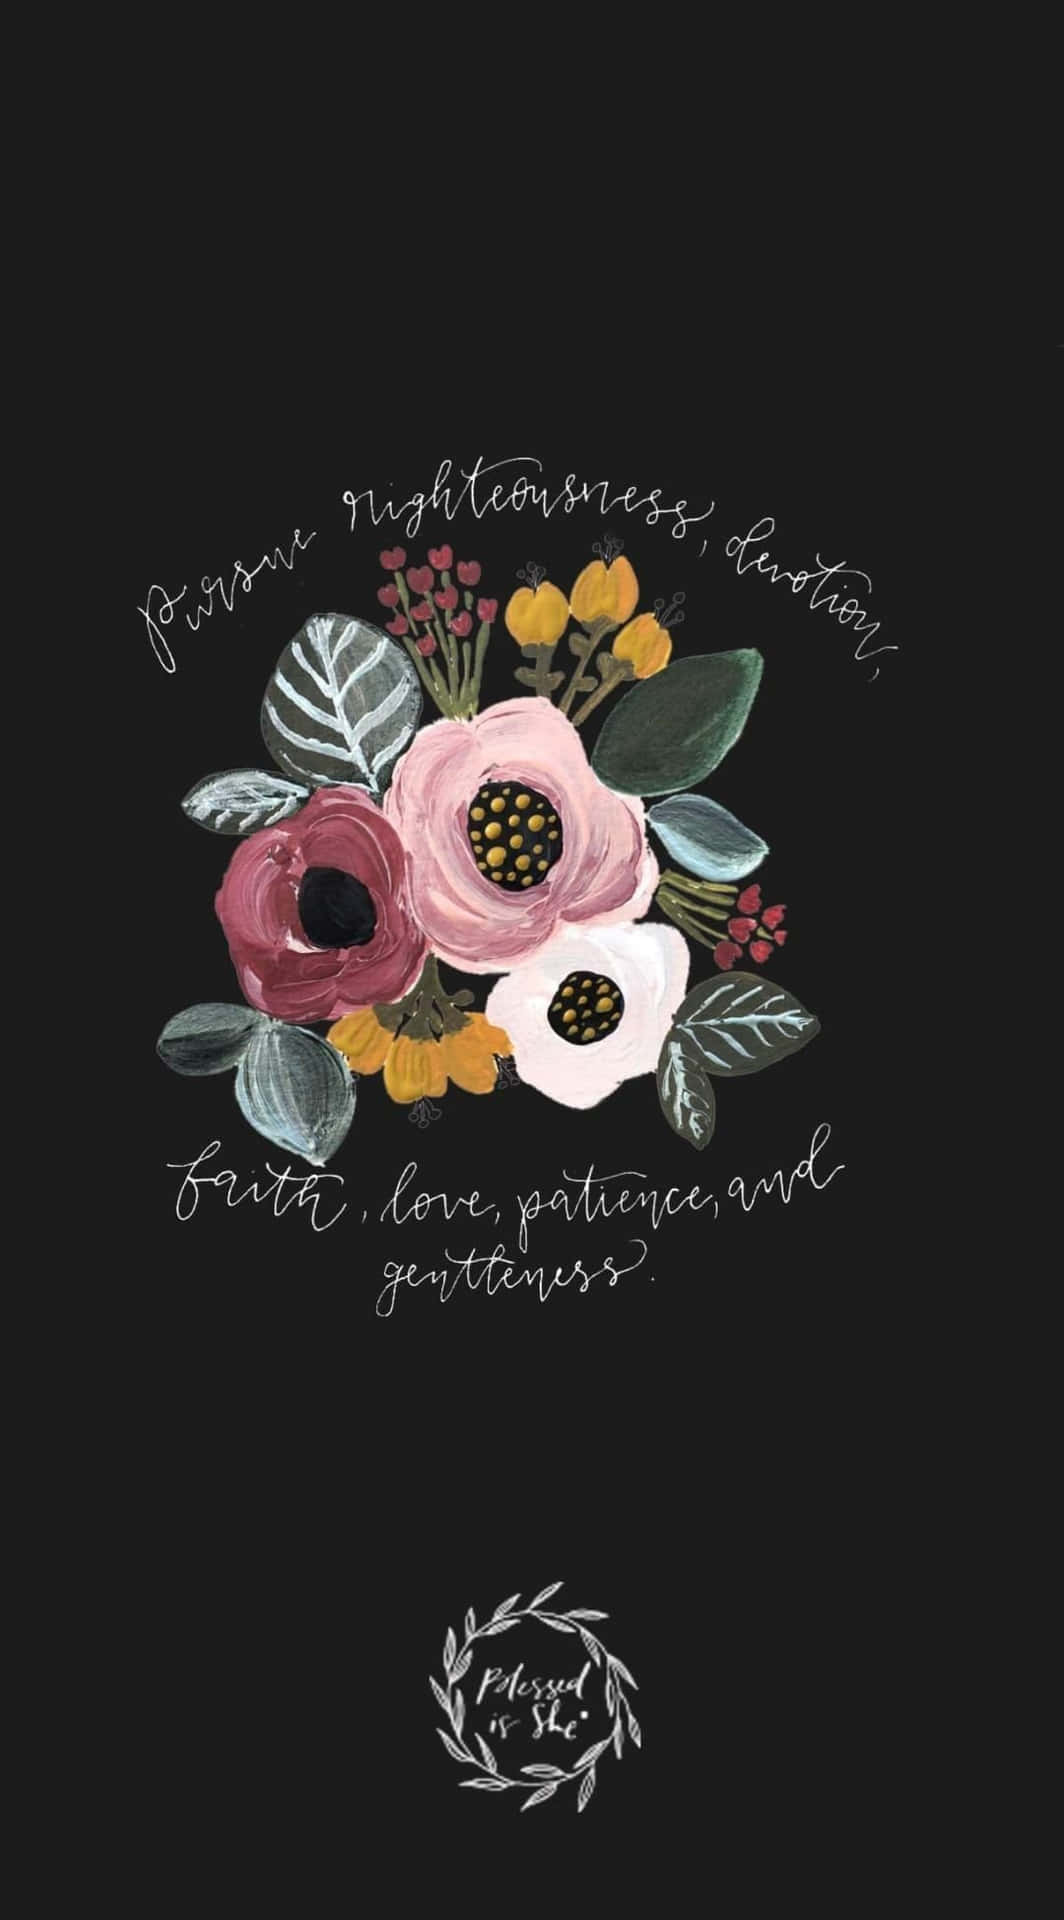 A Black Background With Flowers And A Quote